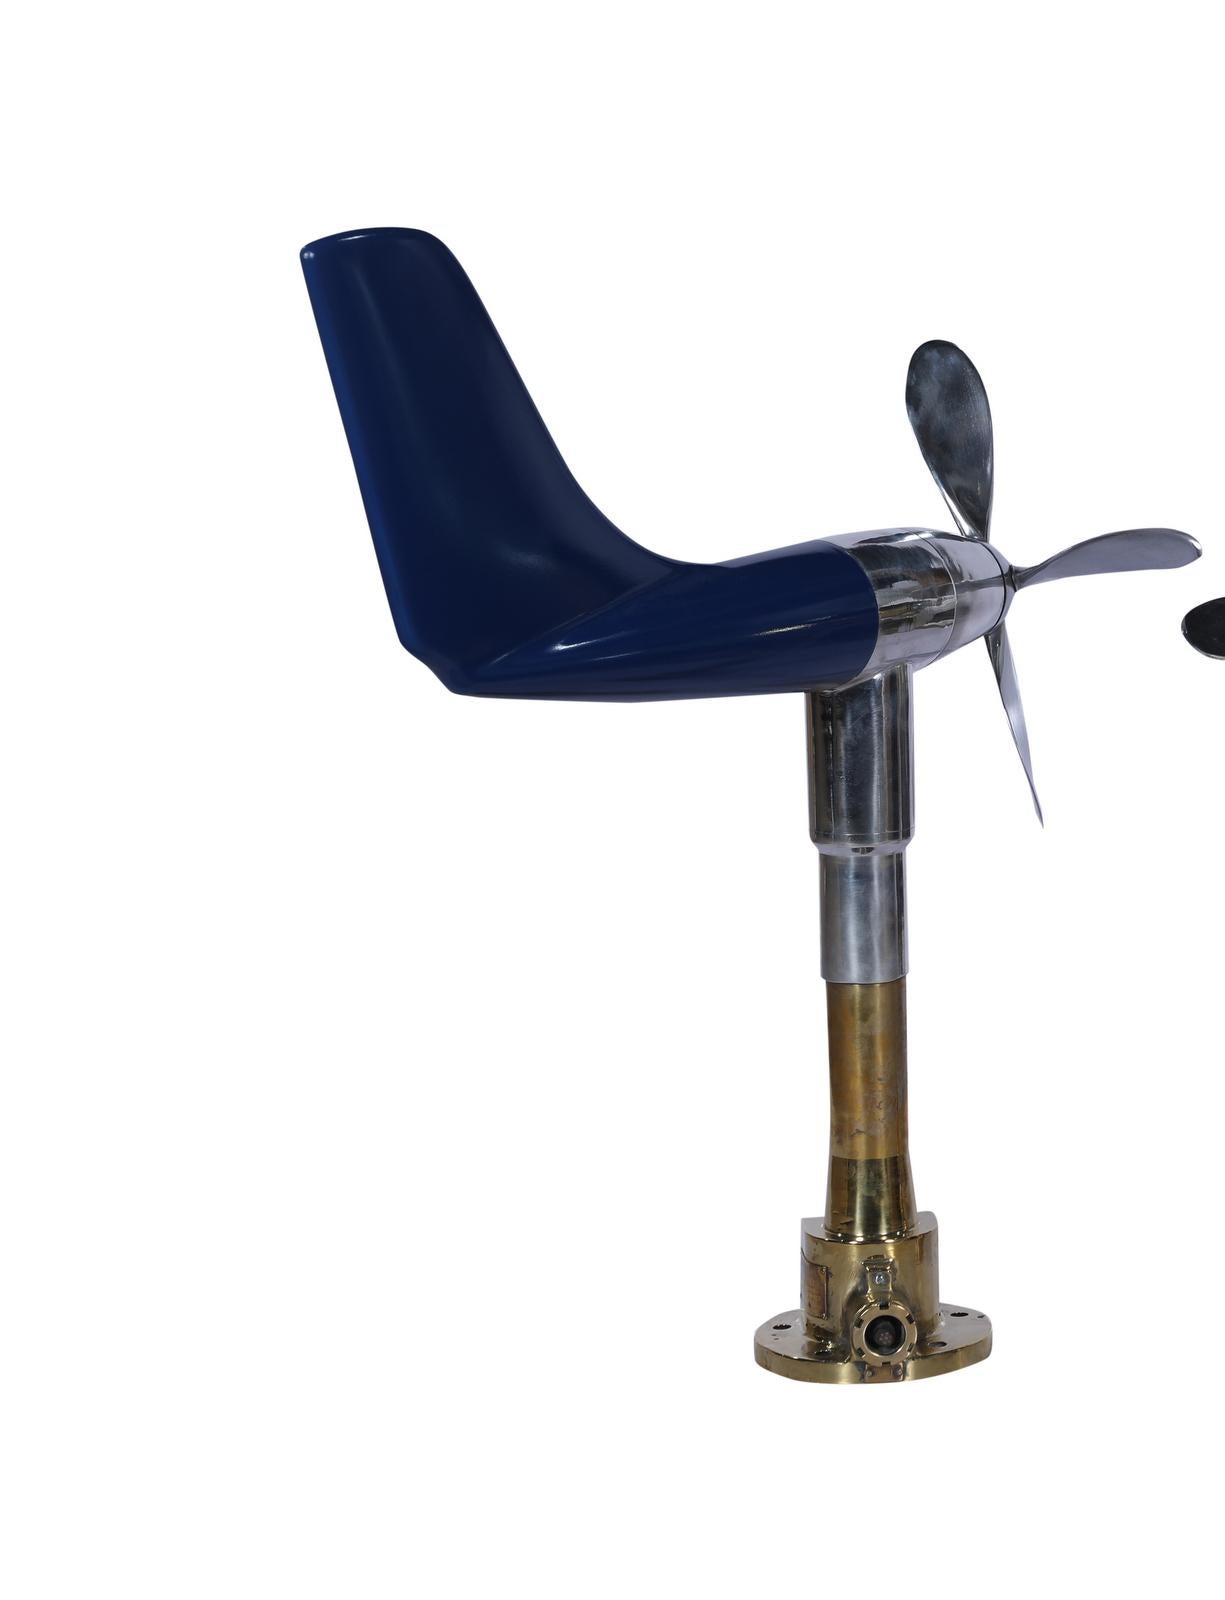 Industrial Ship's Anemometer and Aerovane Repurposed as Kinetic Sculpture For Sale